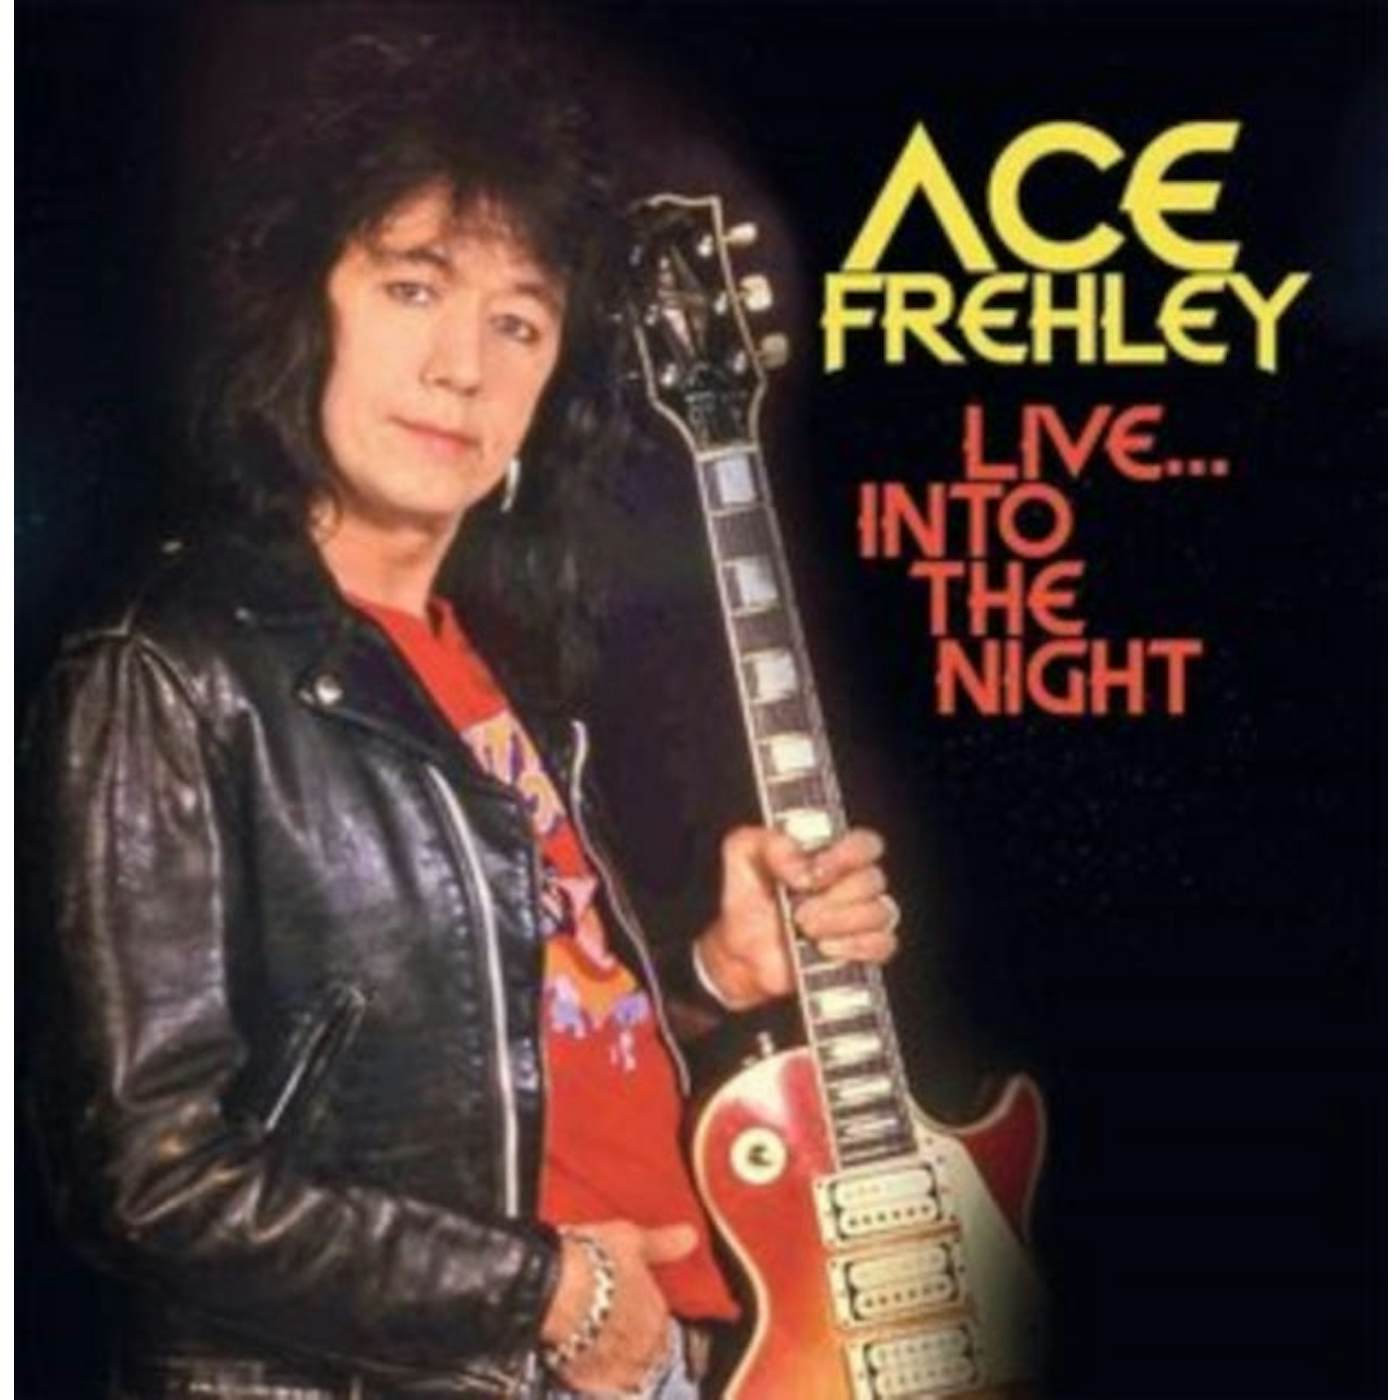 Ace Frehley CD - Live... Into The Night